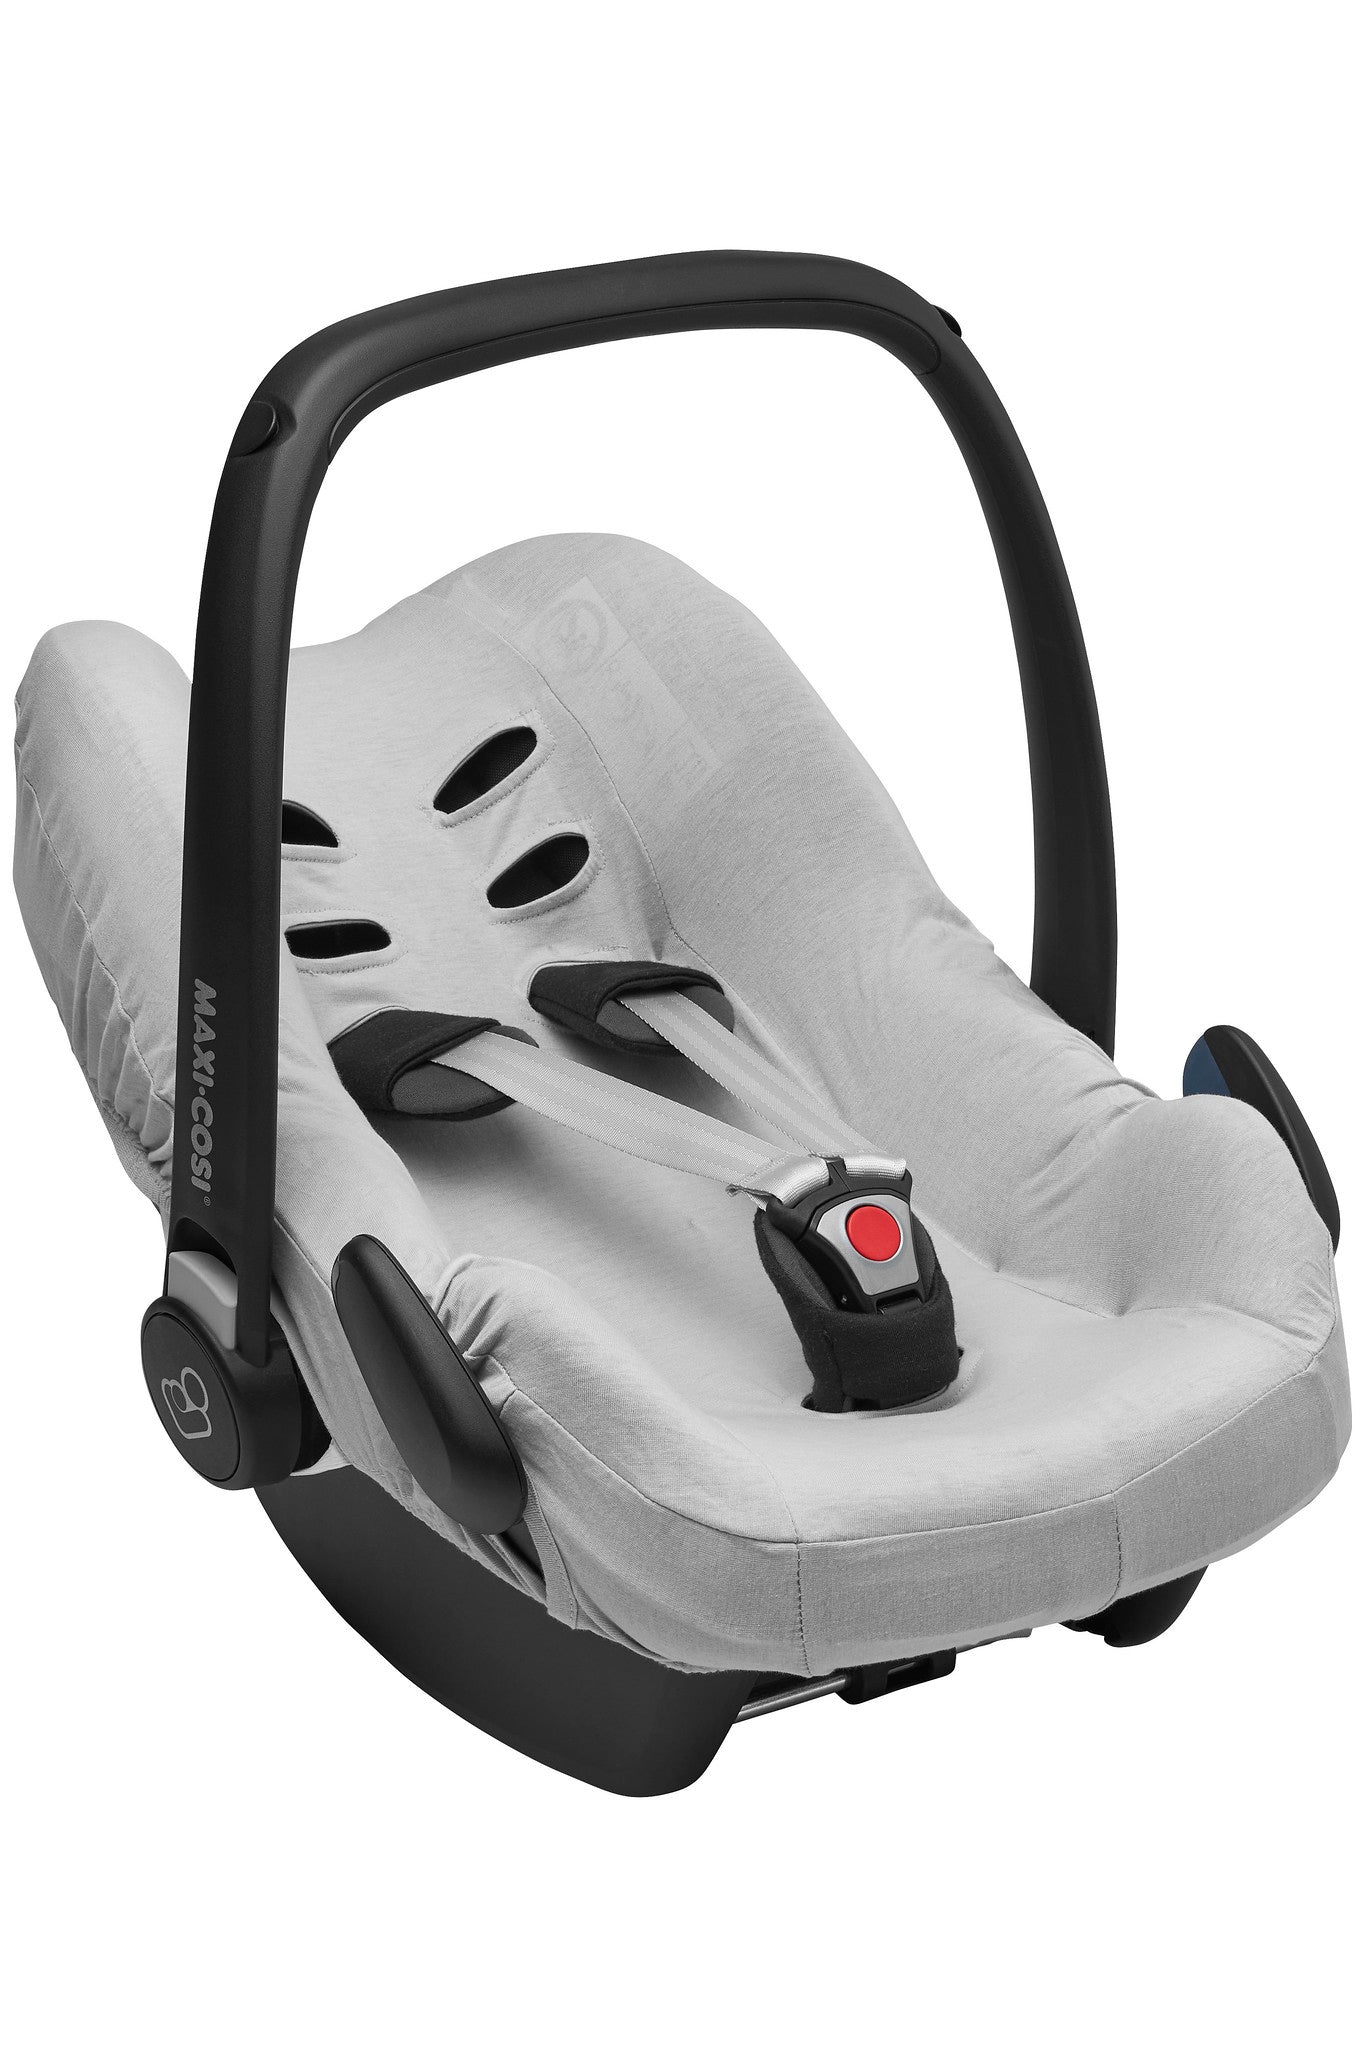 Universal car seat cover maxi cosi (group 0)